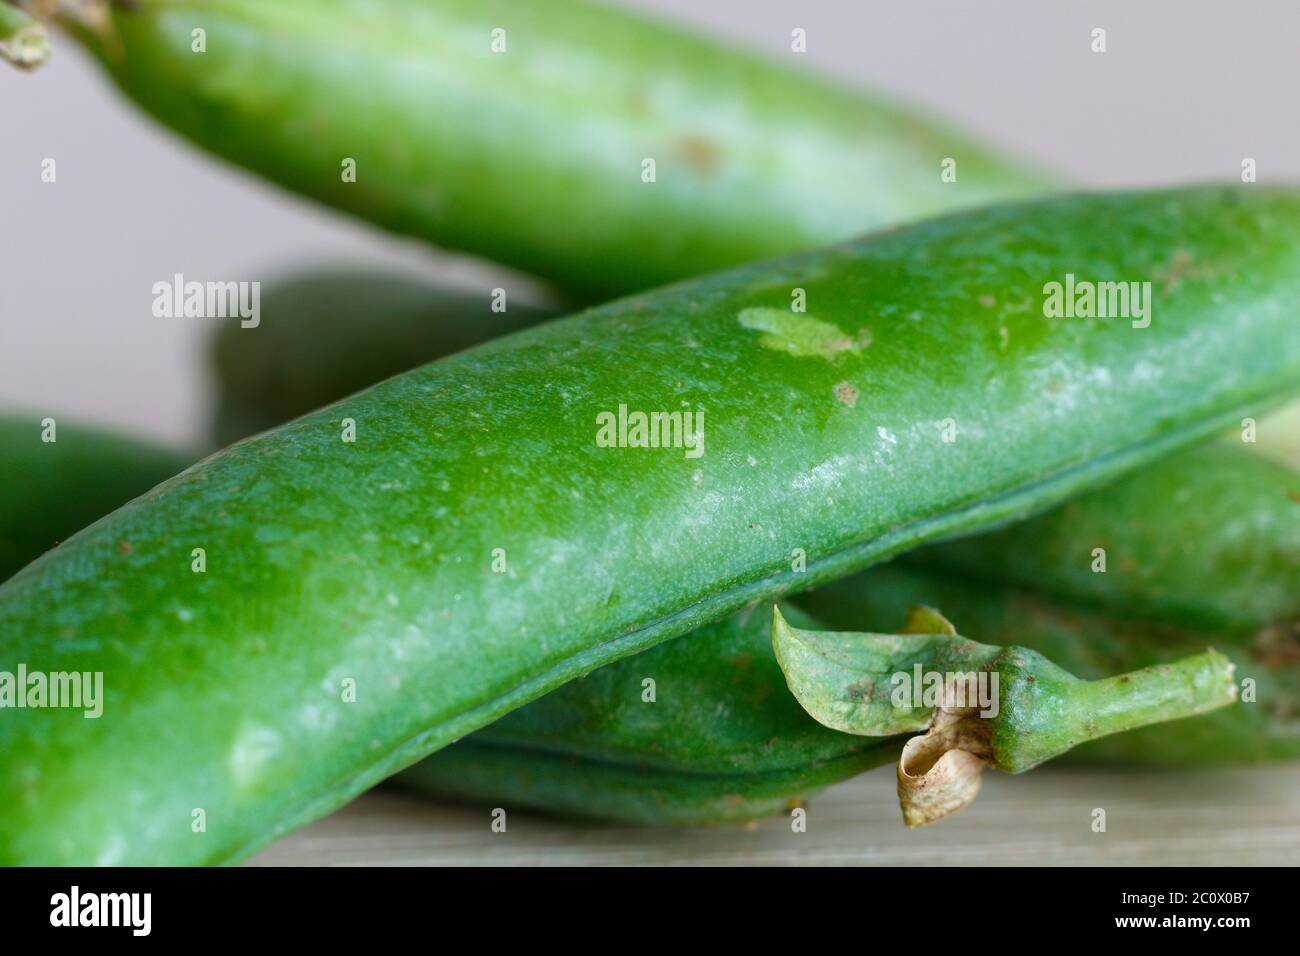 Fresh Pea Close Up. Image Useful For Articles About Agriculture, Food and Healthy Food. Stock Photo